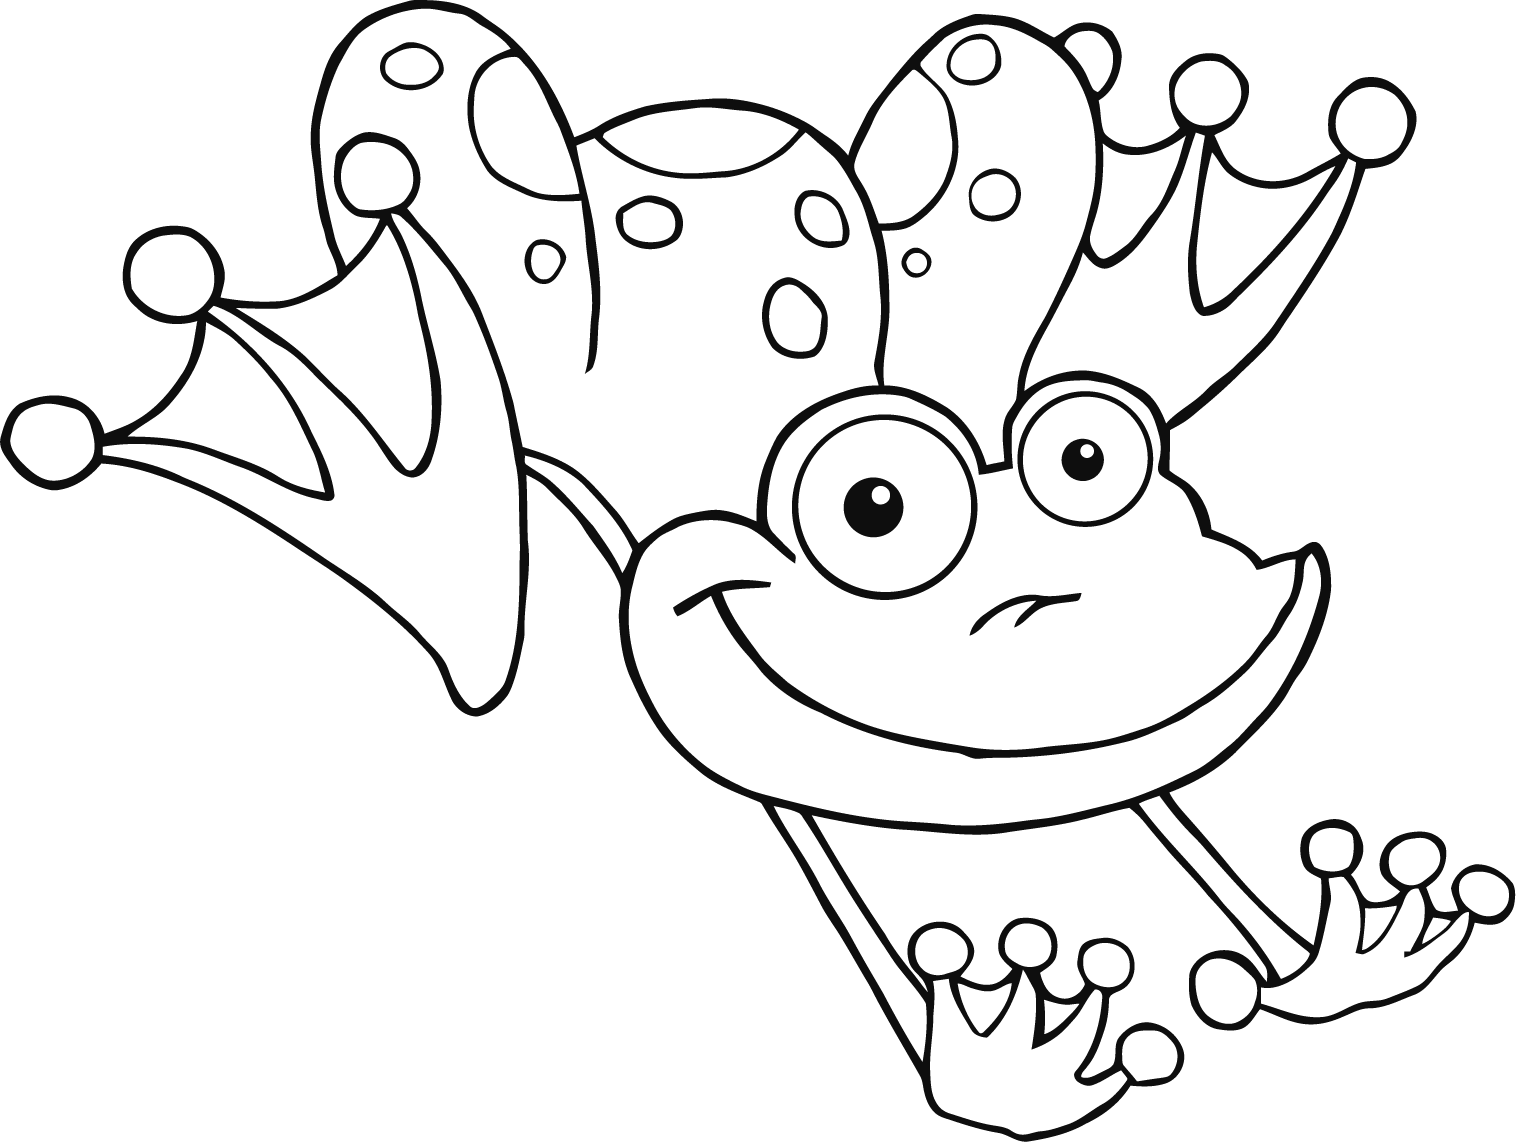 John Henry Coloring Pages - Bestofcoloring.com